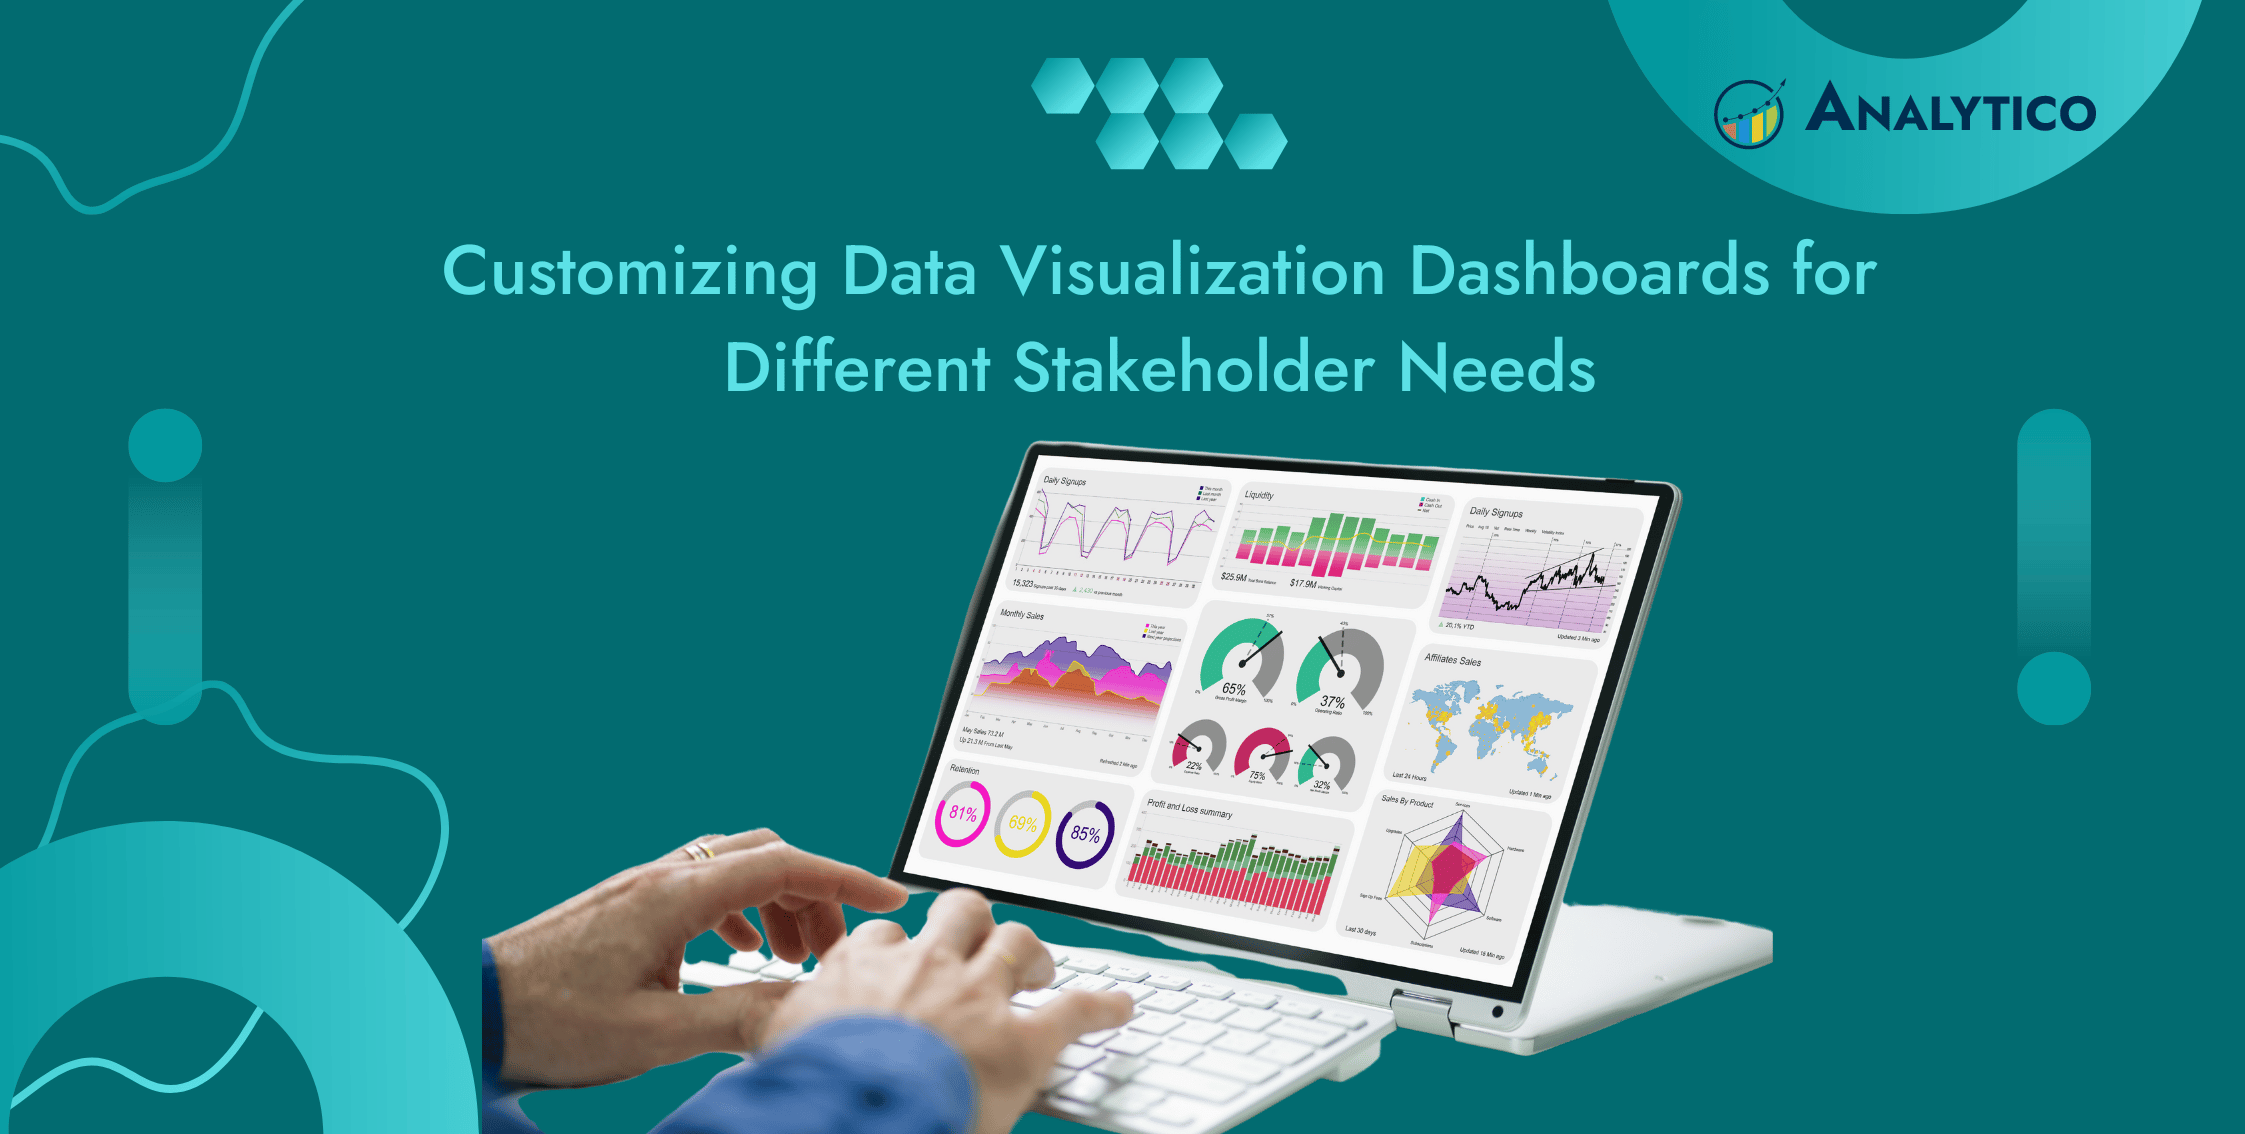 Customize Visualization Dashboards for Different Stakeholder Needs